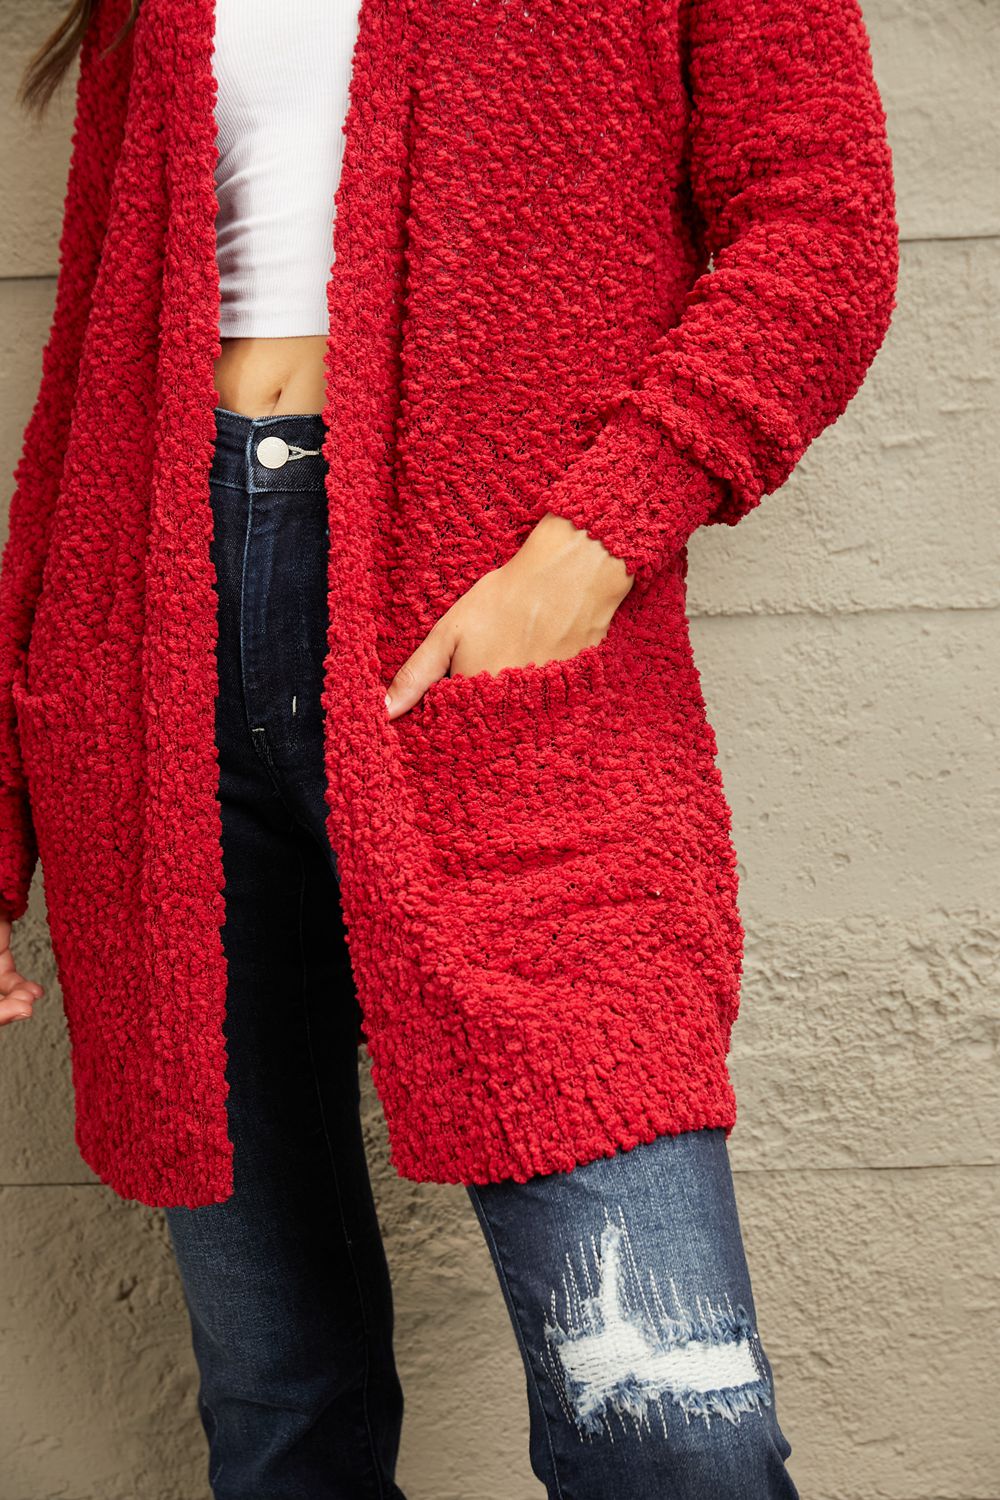 Falling For You Popcorn Cardigan - Red